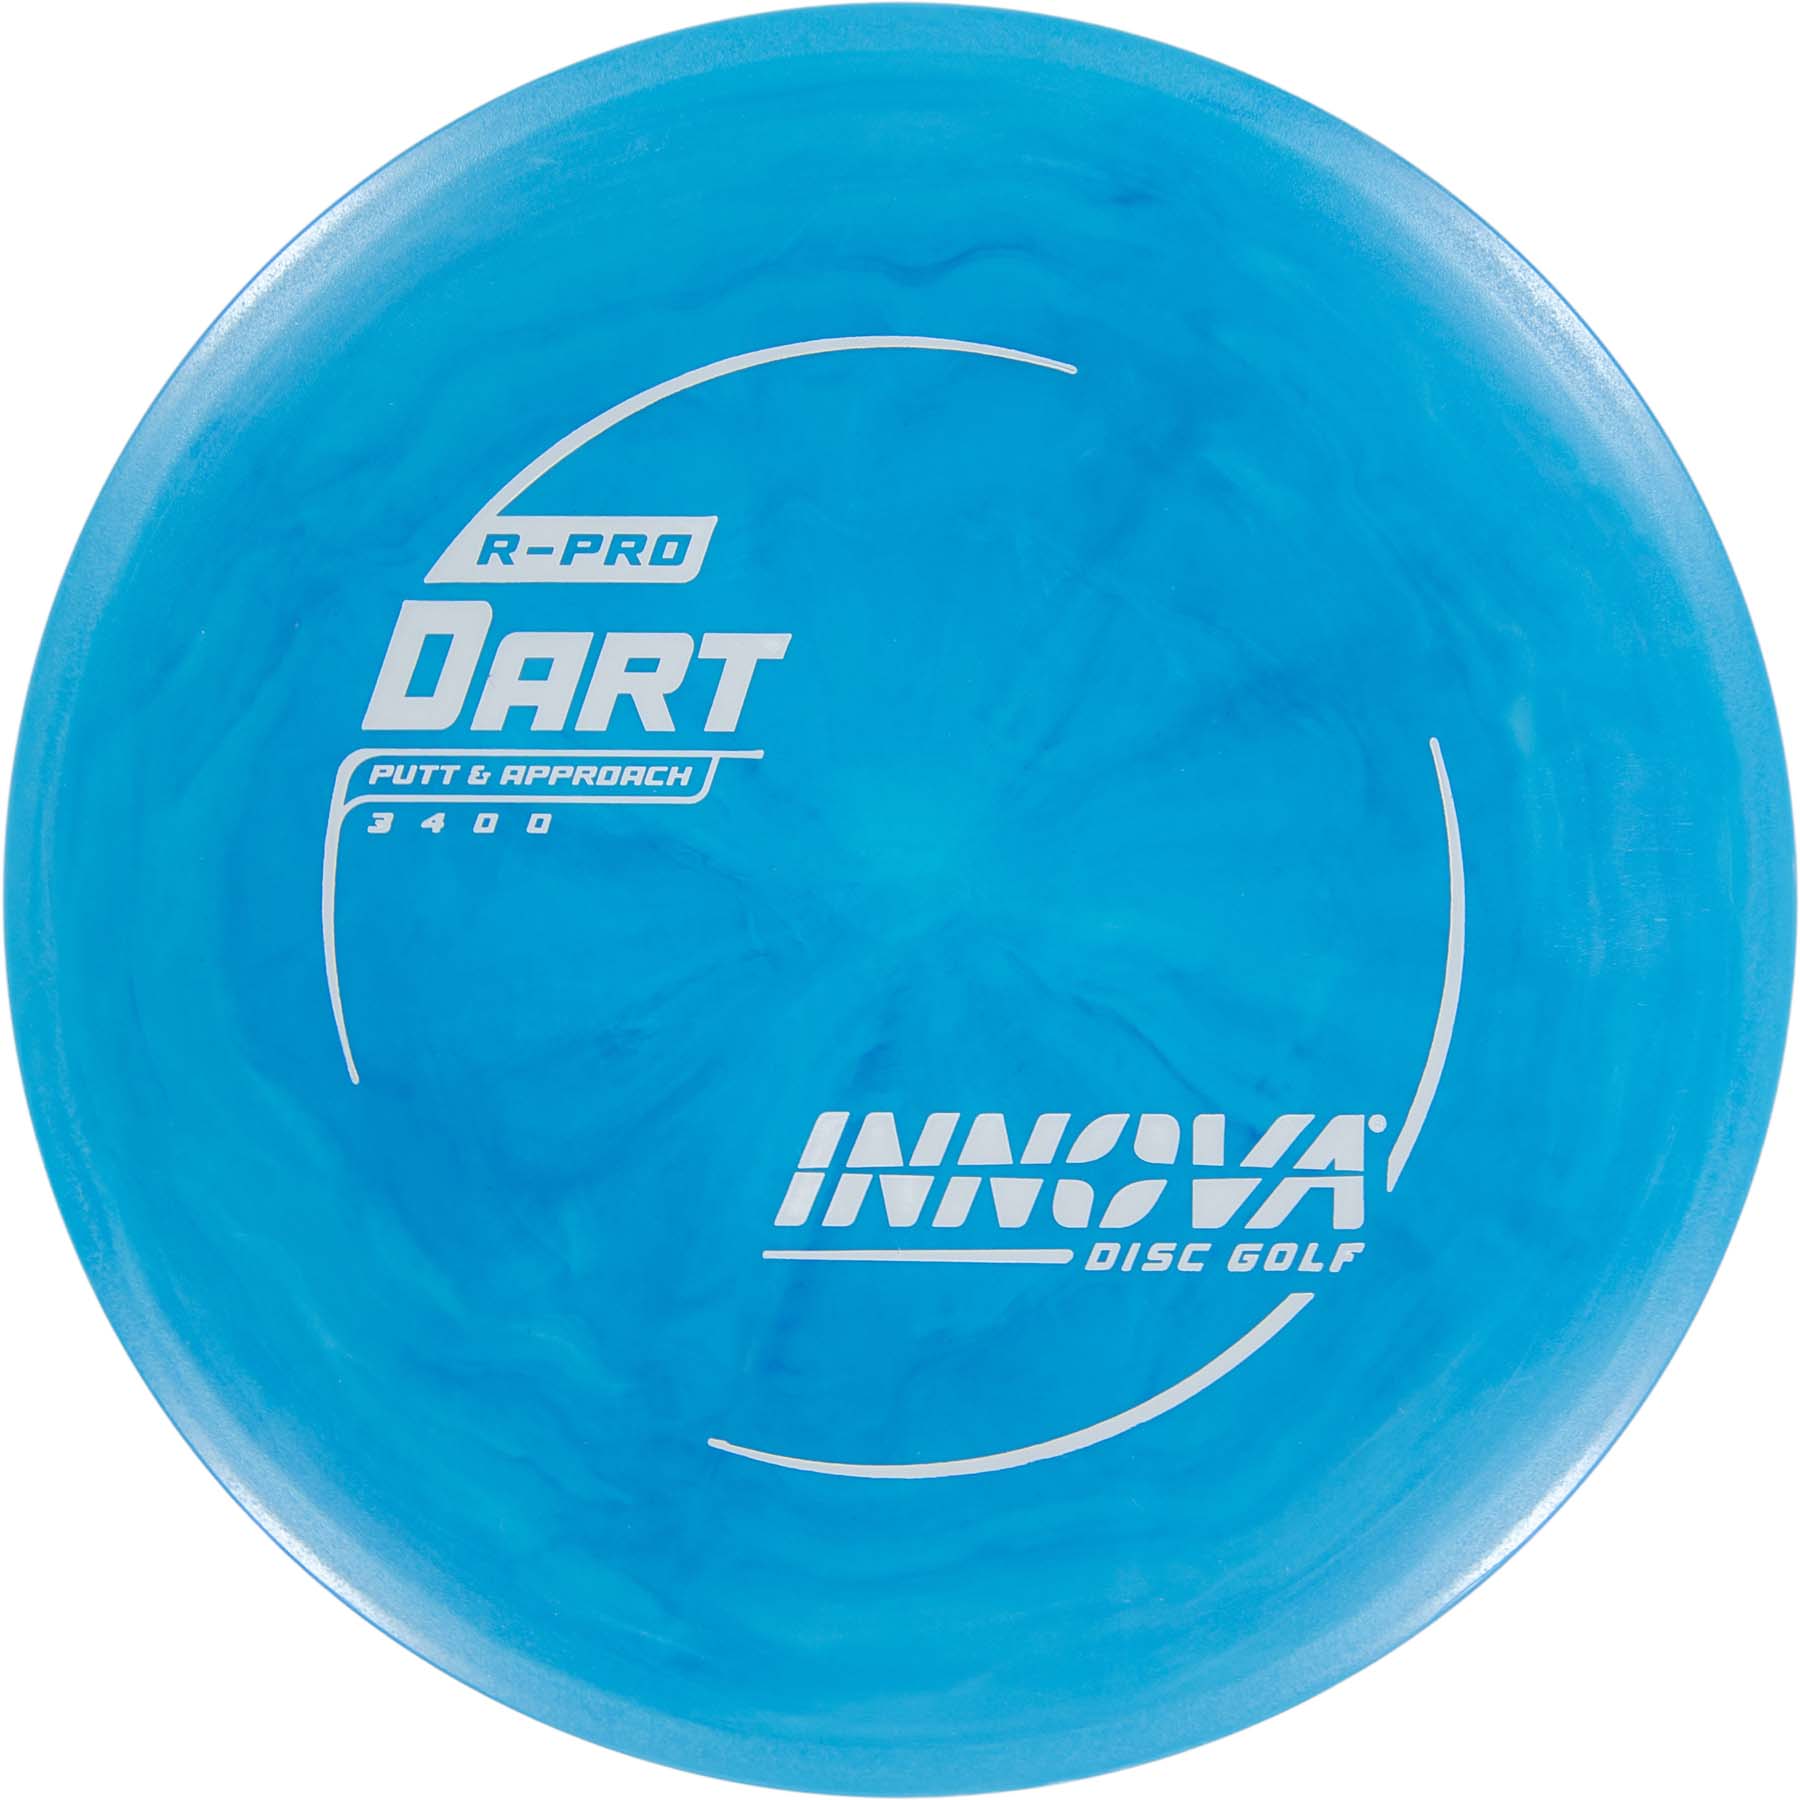 R-Pro Dart from Disc Golf United